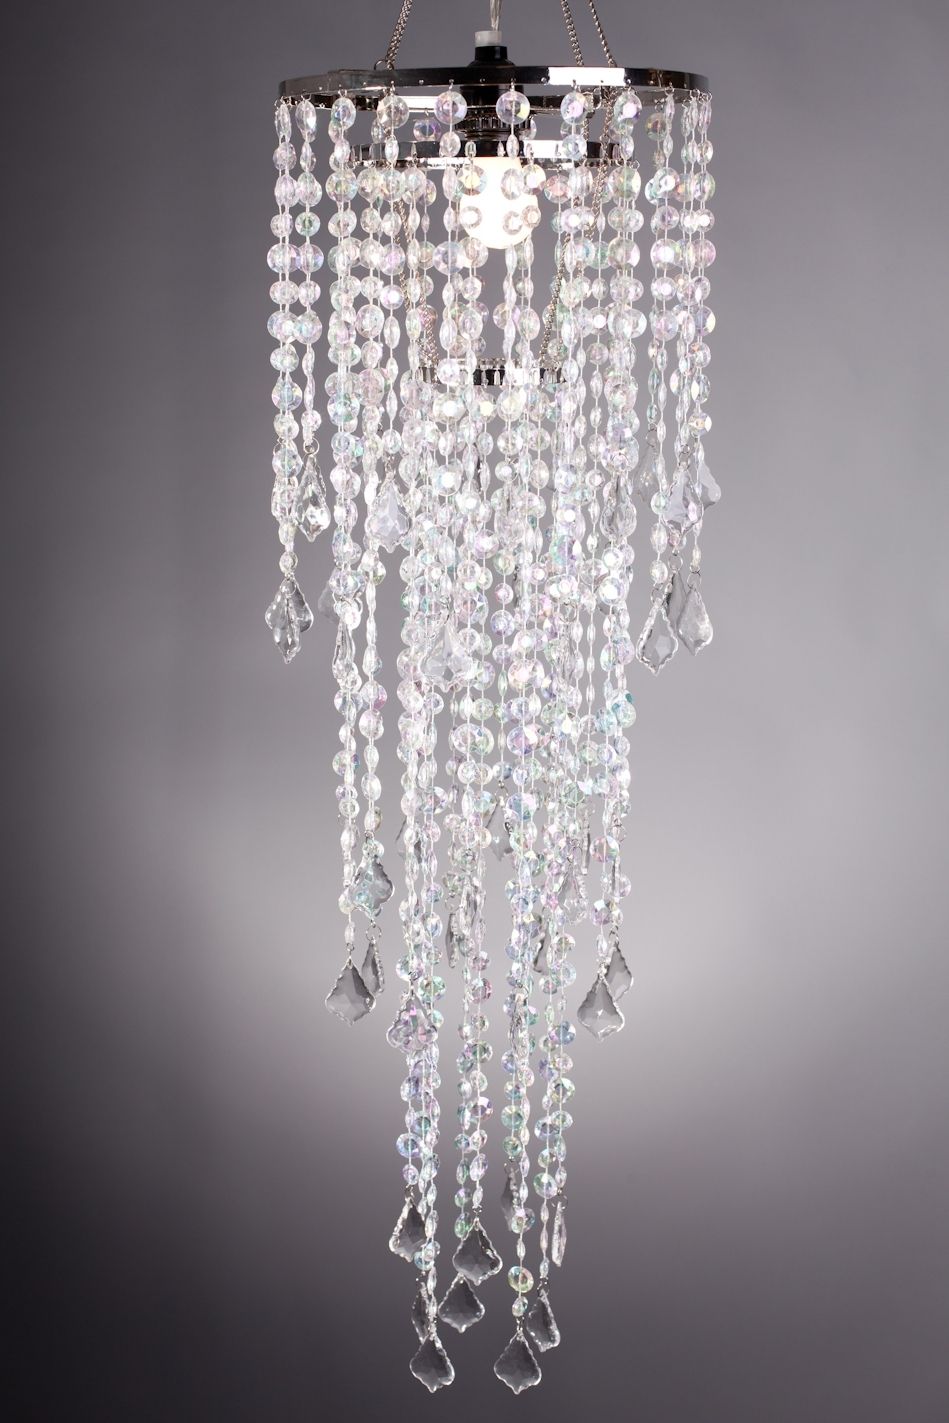 Diamante Duo Beaded Curtains, Chandeliers, Bead Rolls Pertaining To Best And Newest Faux Crystal Chandelier Wedding Bead Strands (View 7 of 15)